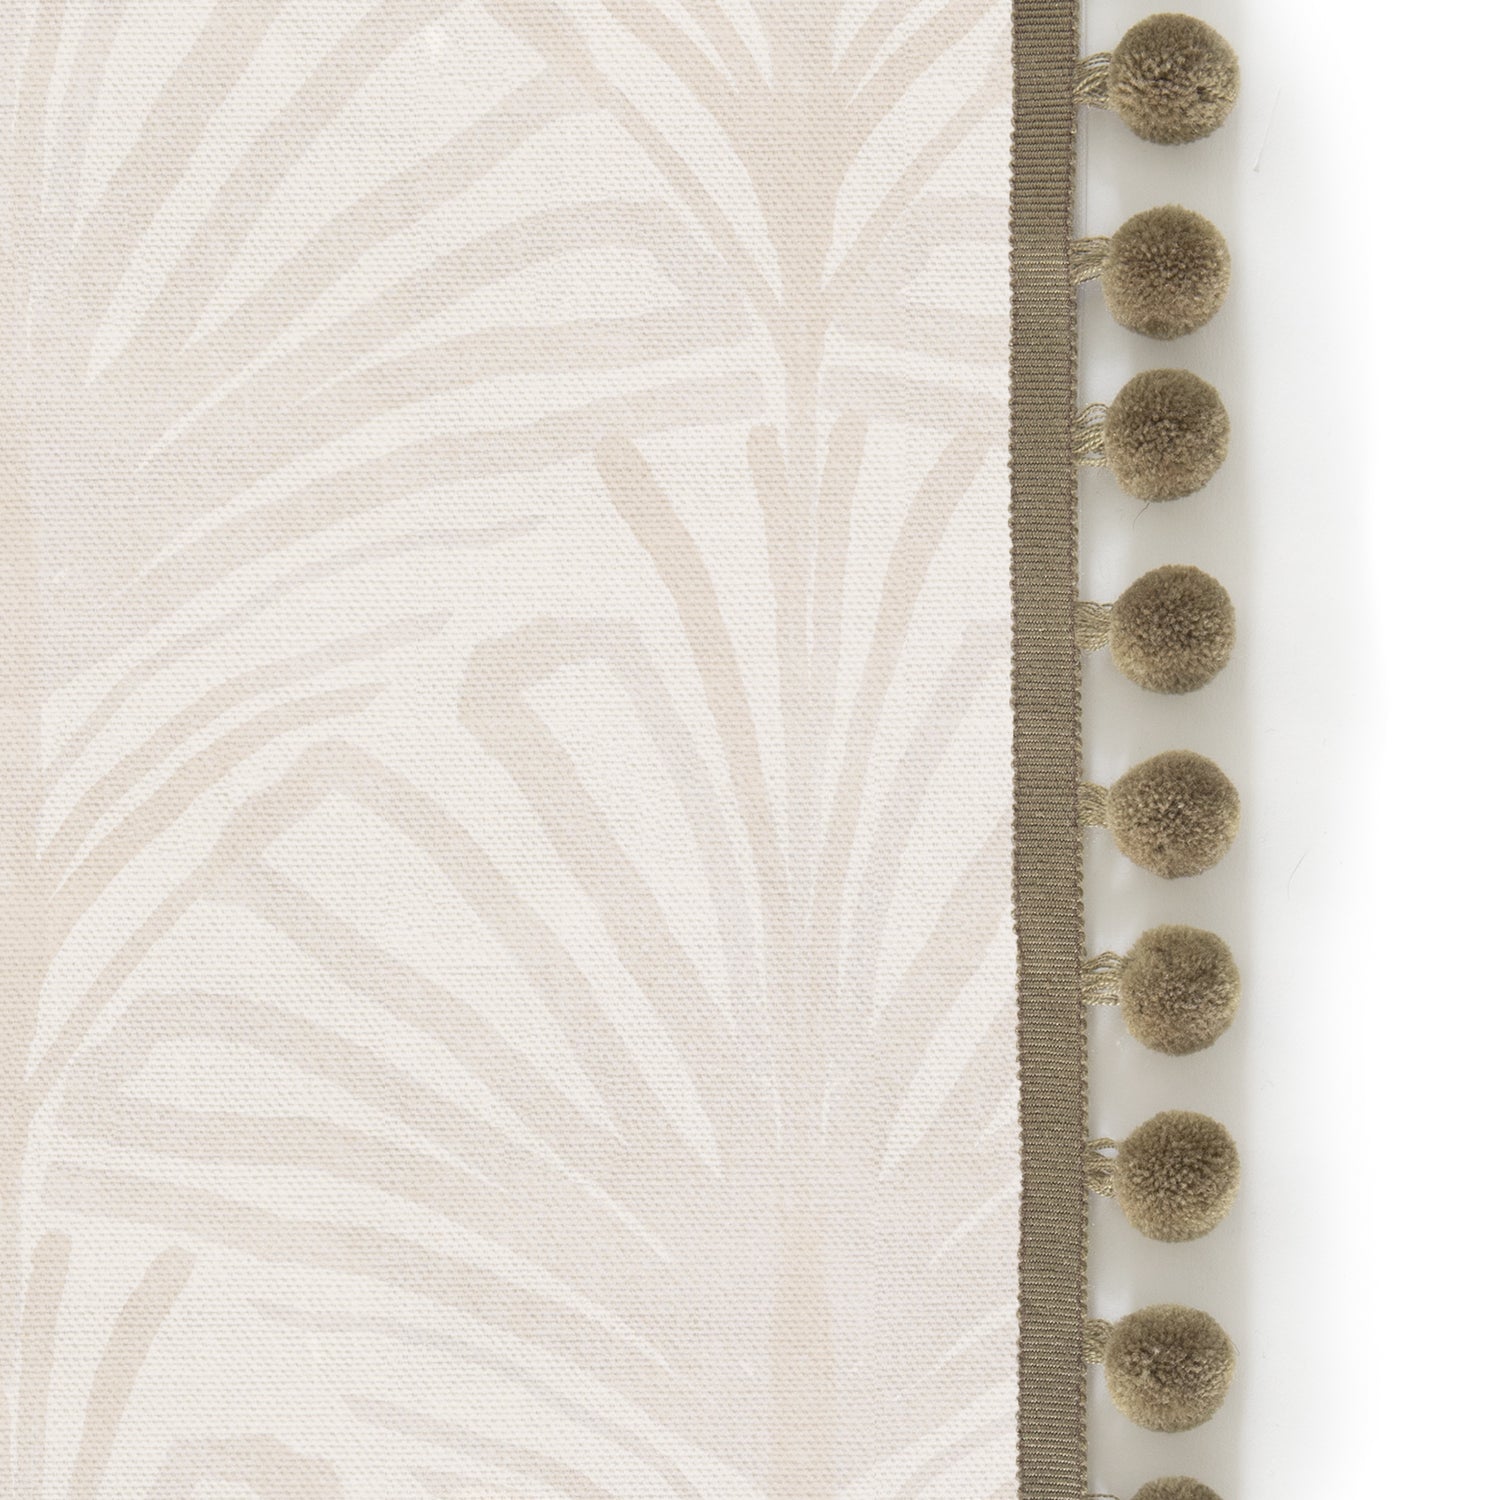 Upclose picture of Suzy Sand custom Beige Palmshower curtain with olive pom pom trim